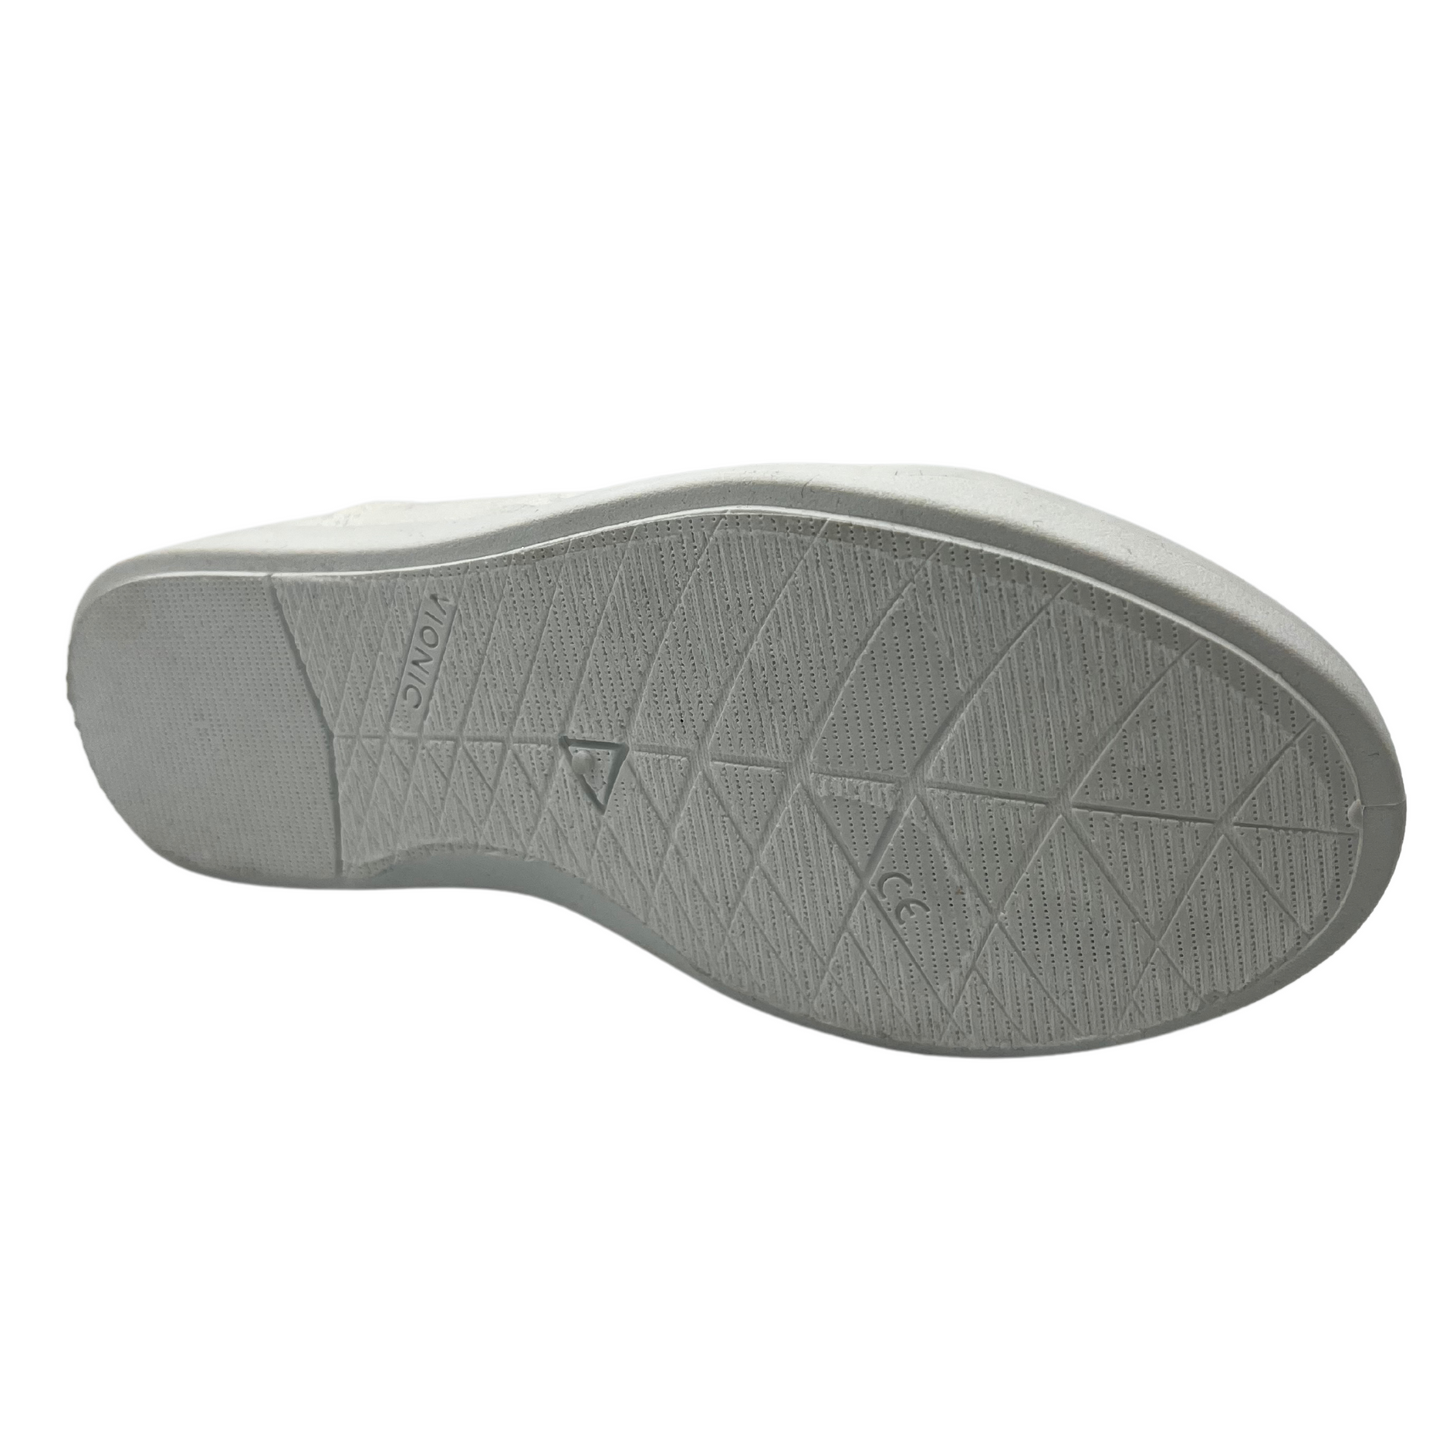 Bottom view of white canvas shoe with white rubber outsole and white laces